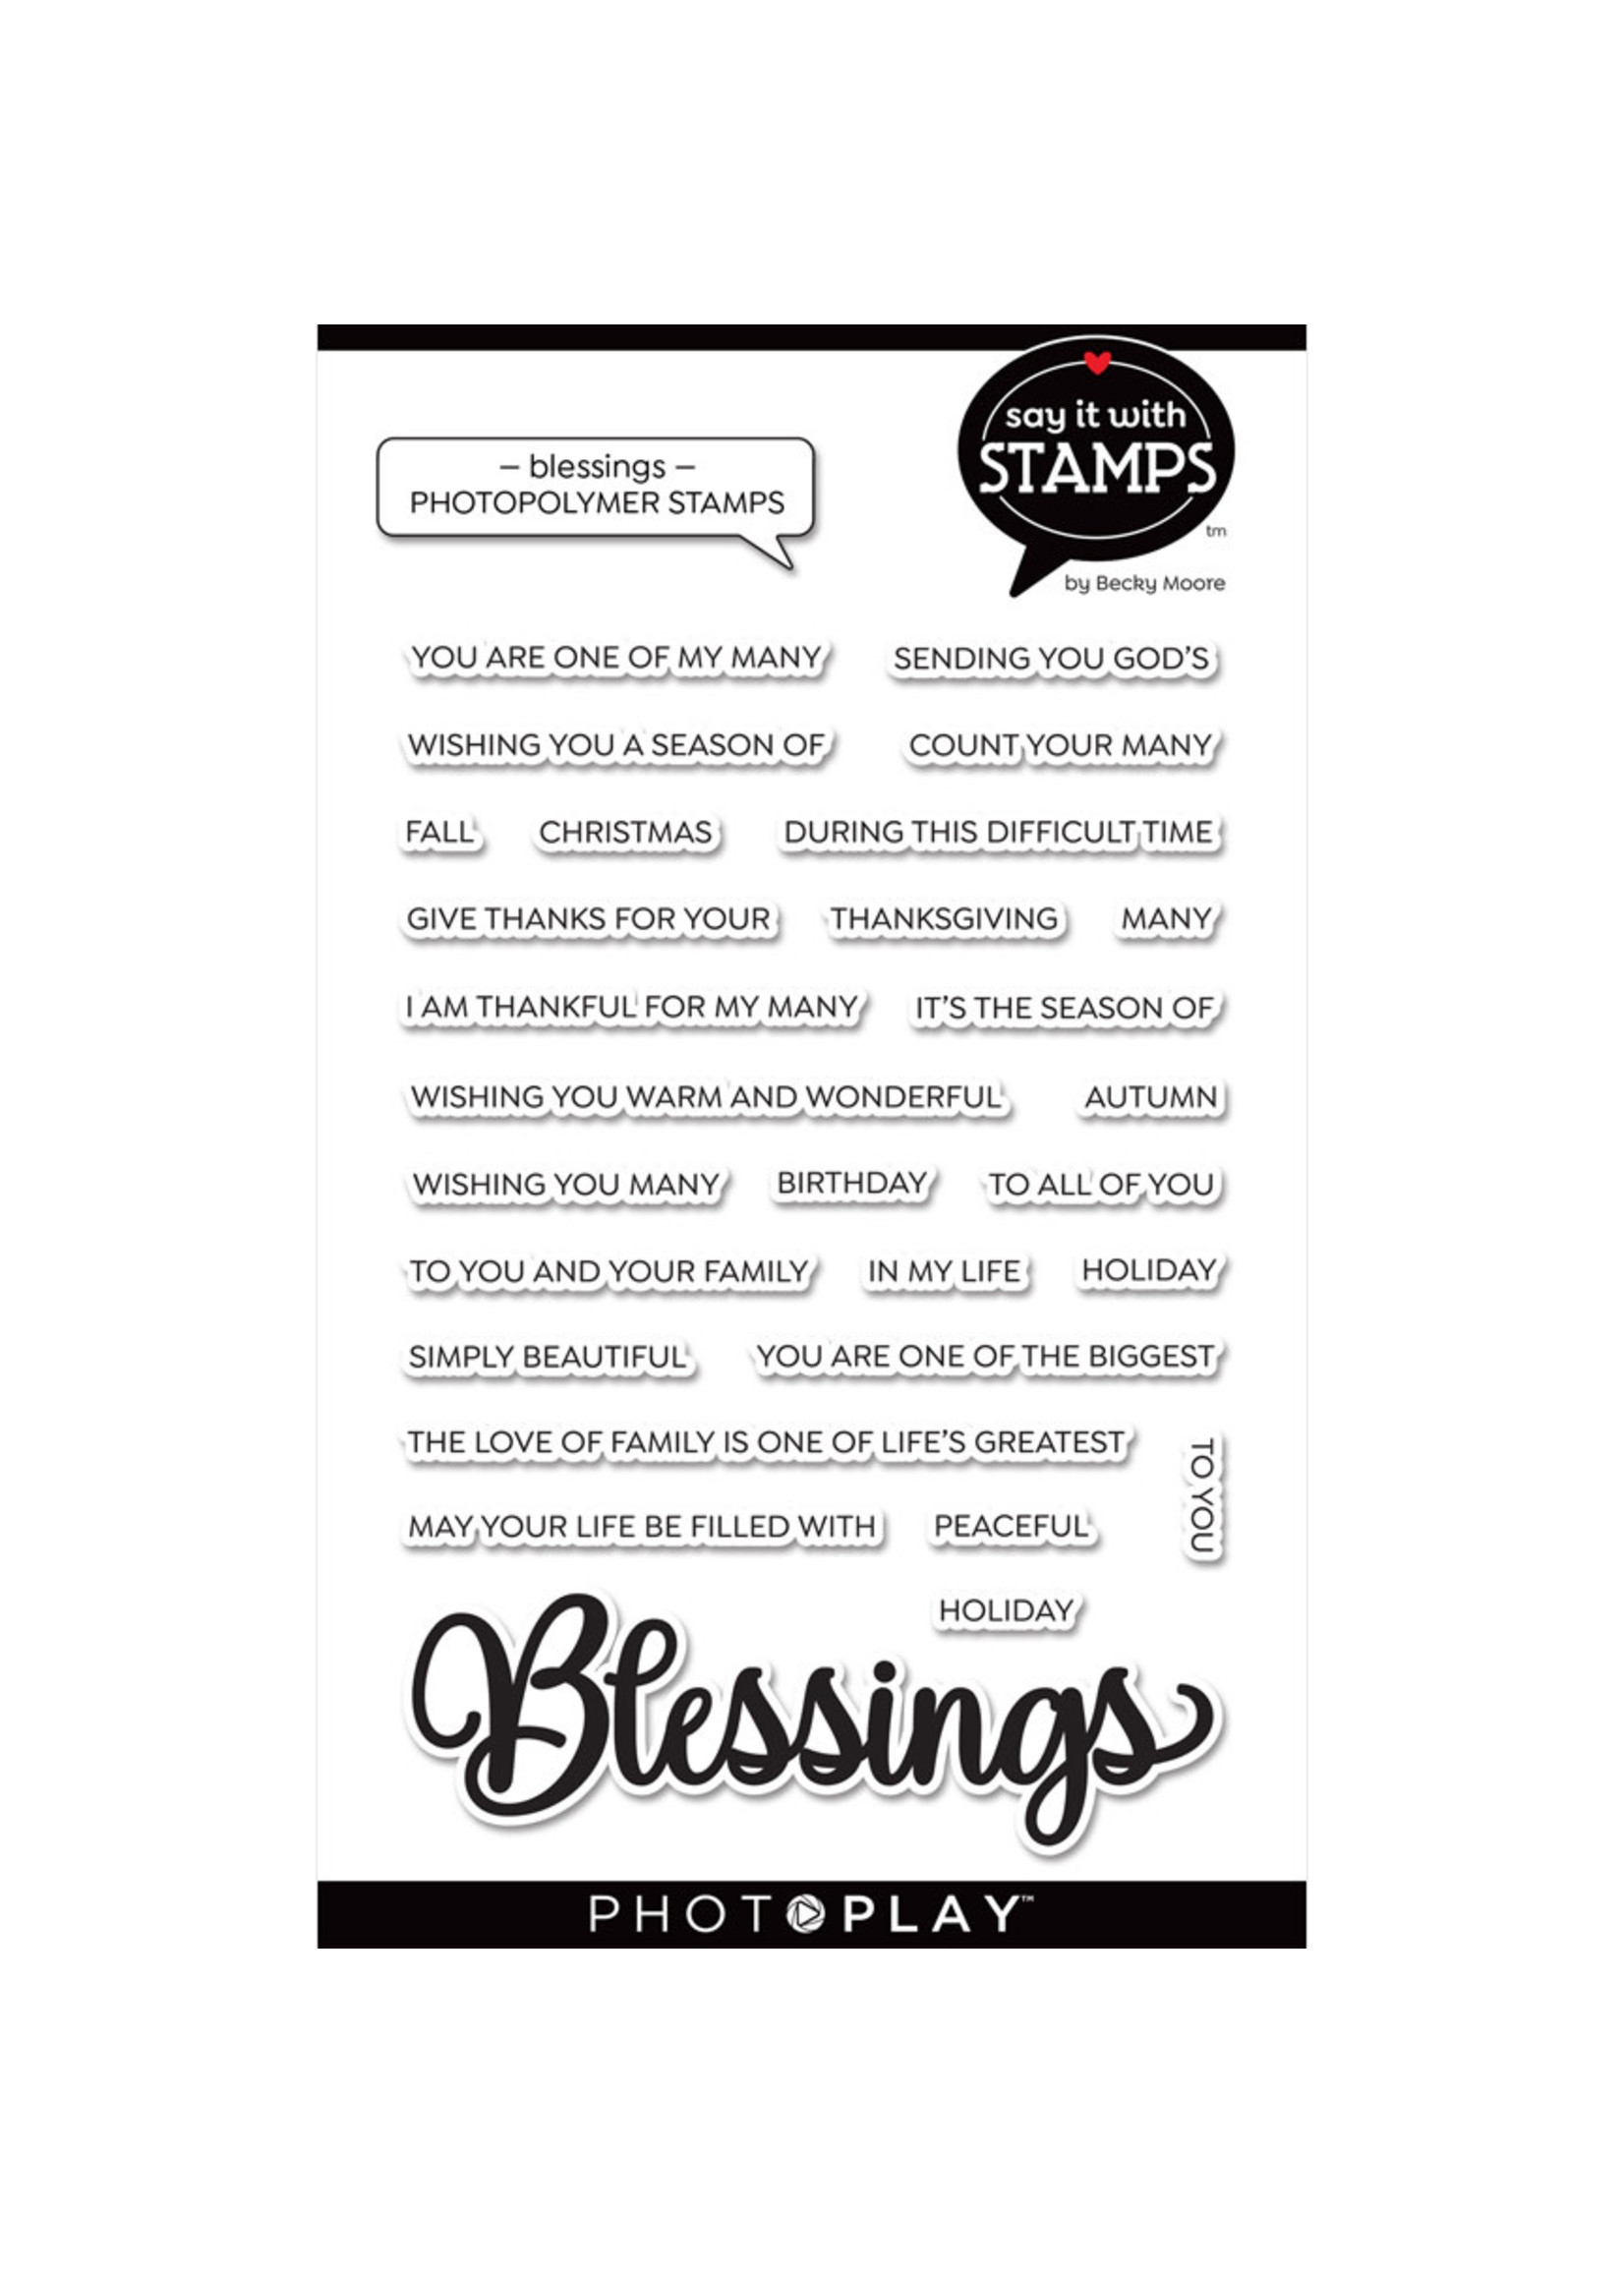 Photoplay Blessing 4"x6" Word Stamp